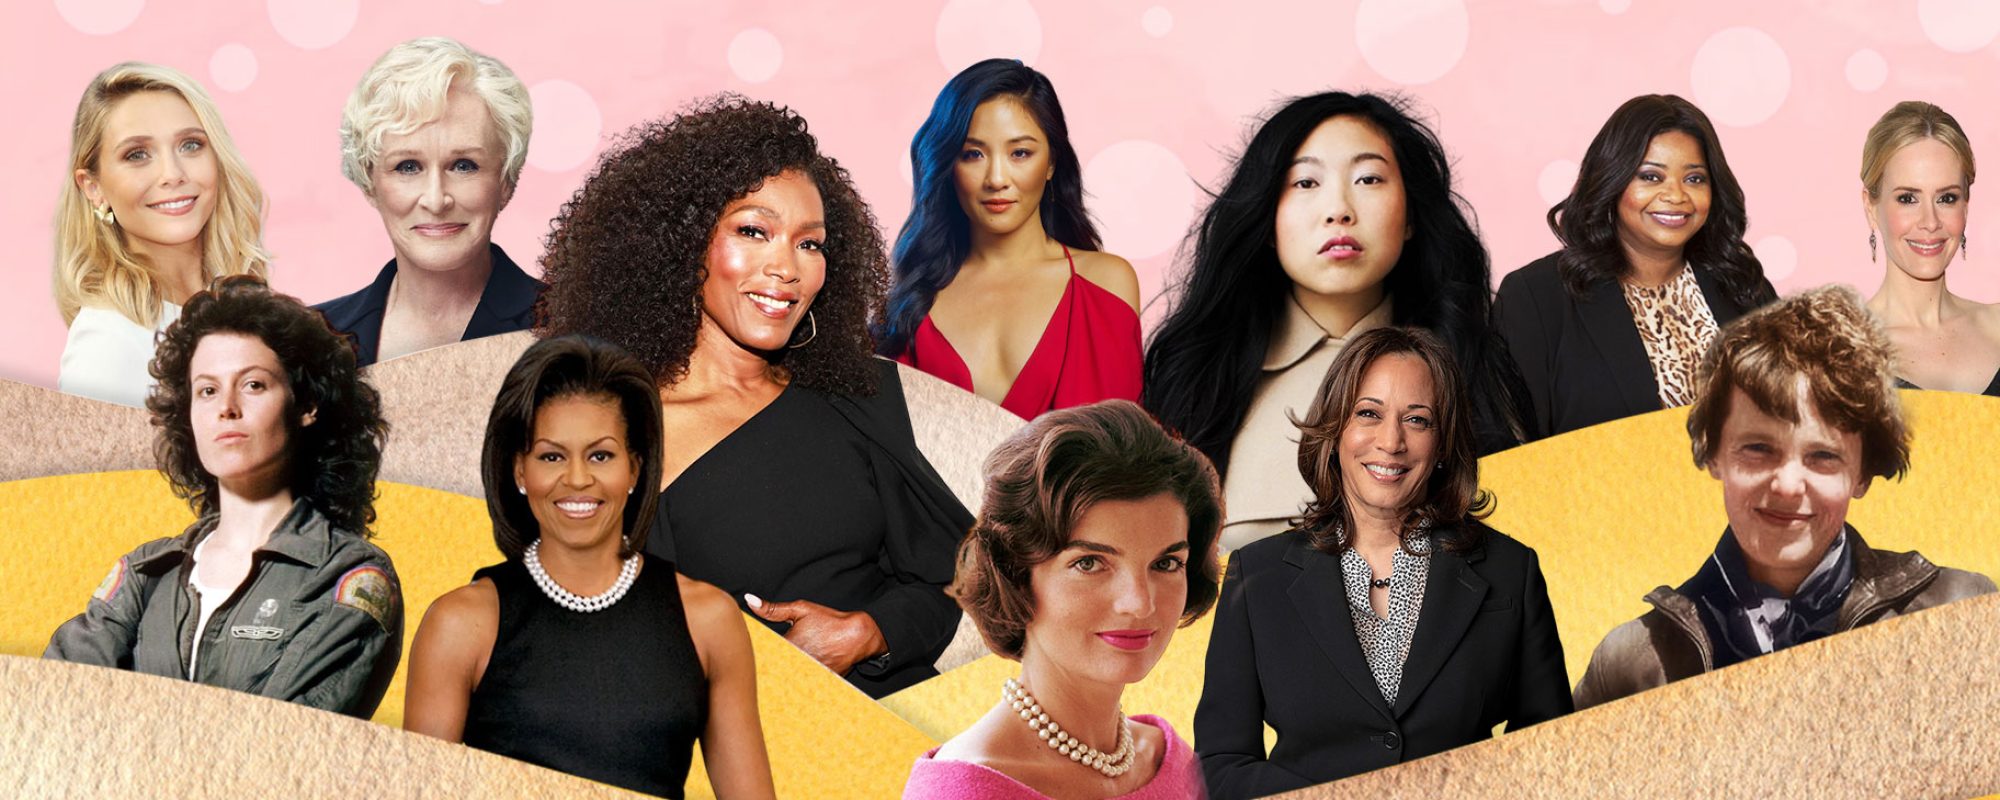 OVATION TV CELEBRATES WOMEN’S HISTORY MONTH 2023 WITH WEEK-DAY MORNING LINEAR PROGRAMMING,  INCLUDING NETWORK PREMIERES, AND A CURATED ON-DEMAND LINEUP OF DOCS & SERIES